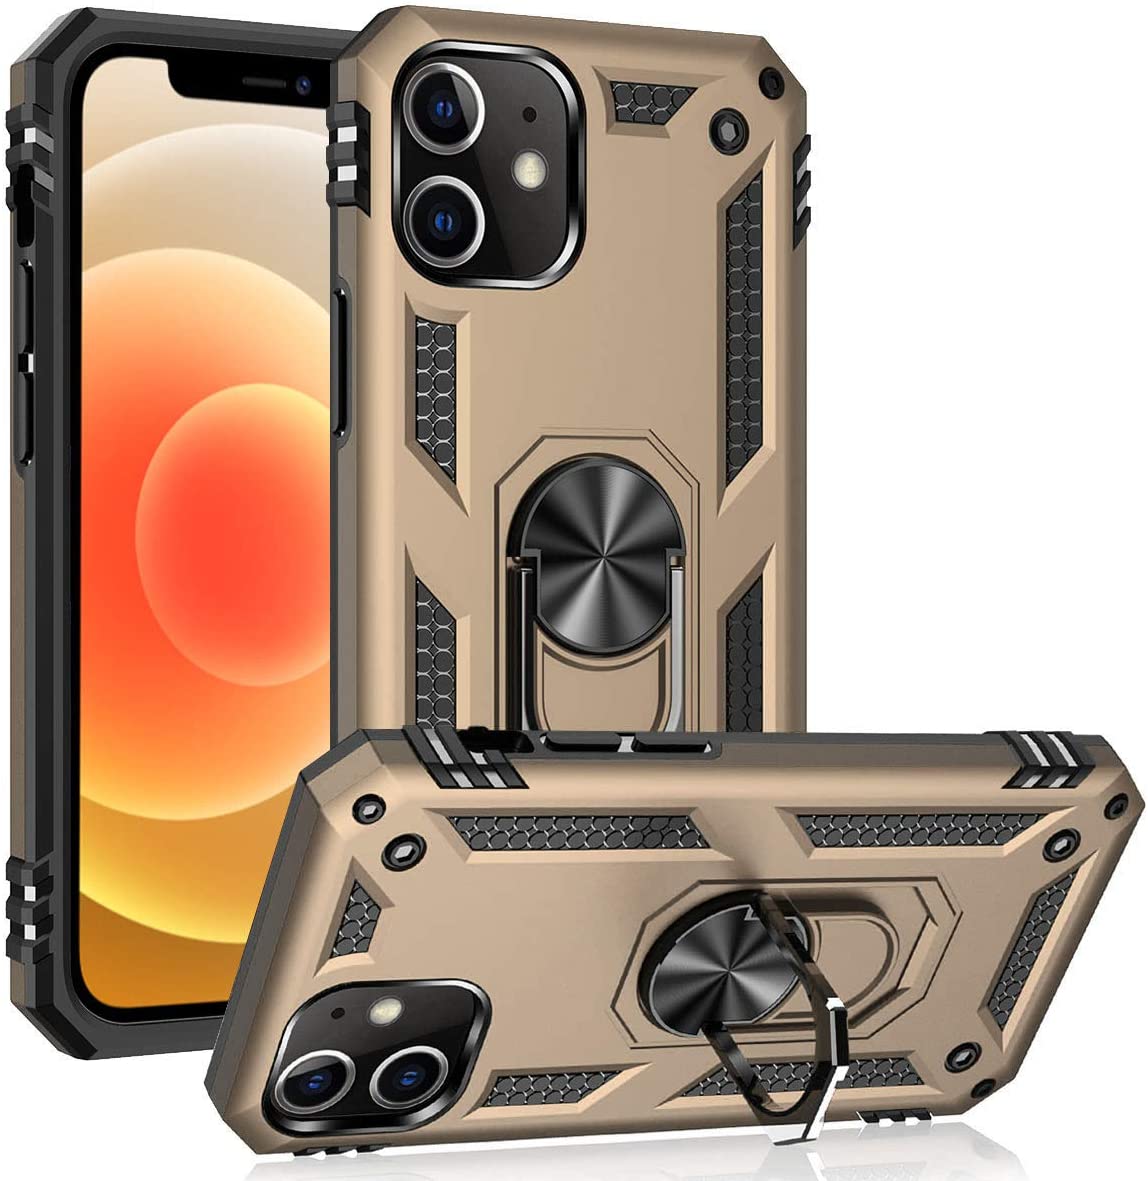 Iphone 11pro Max cases varieties - e4cents